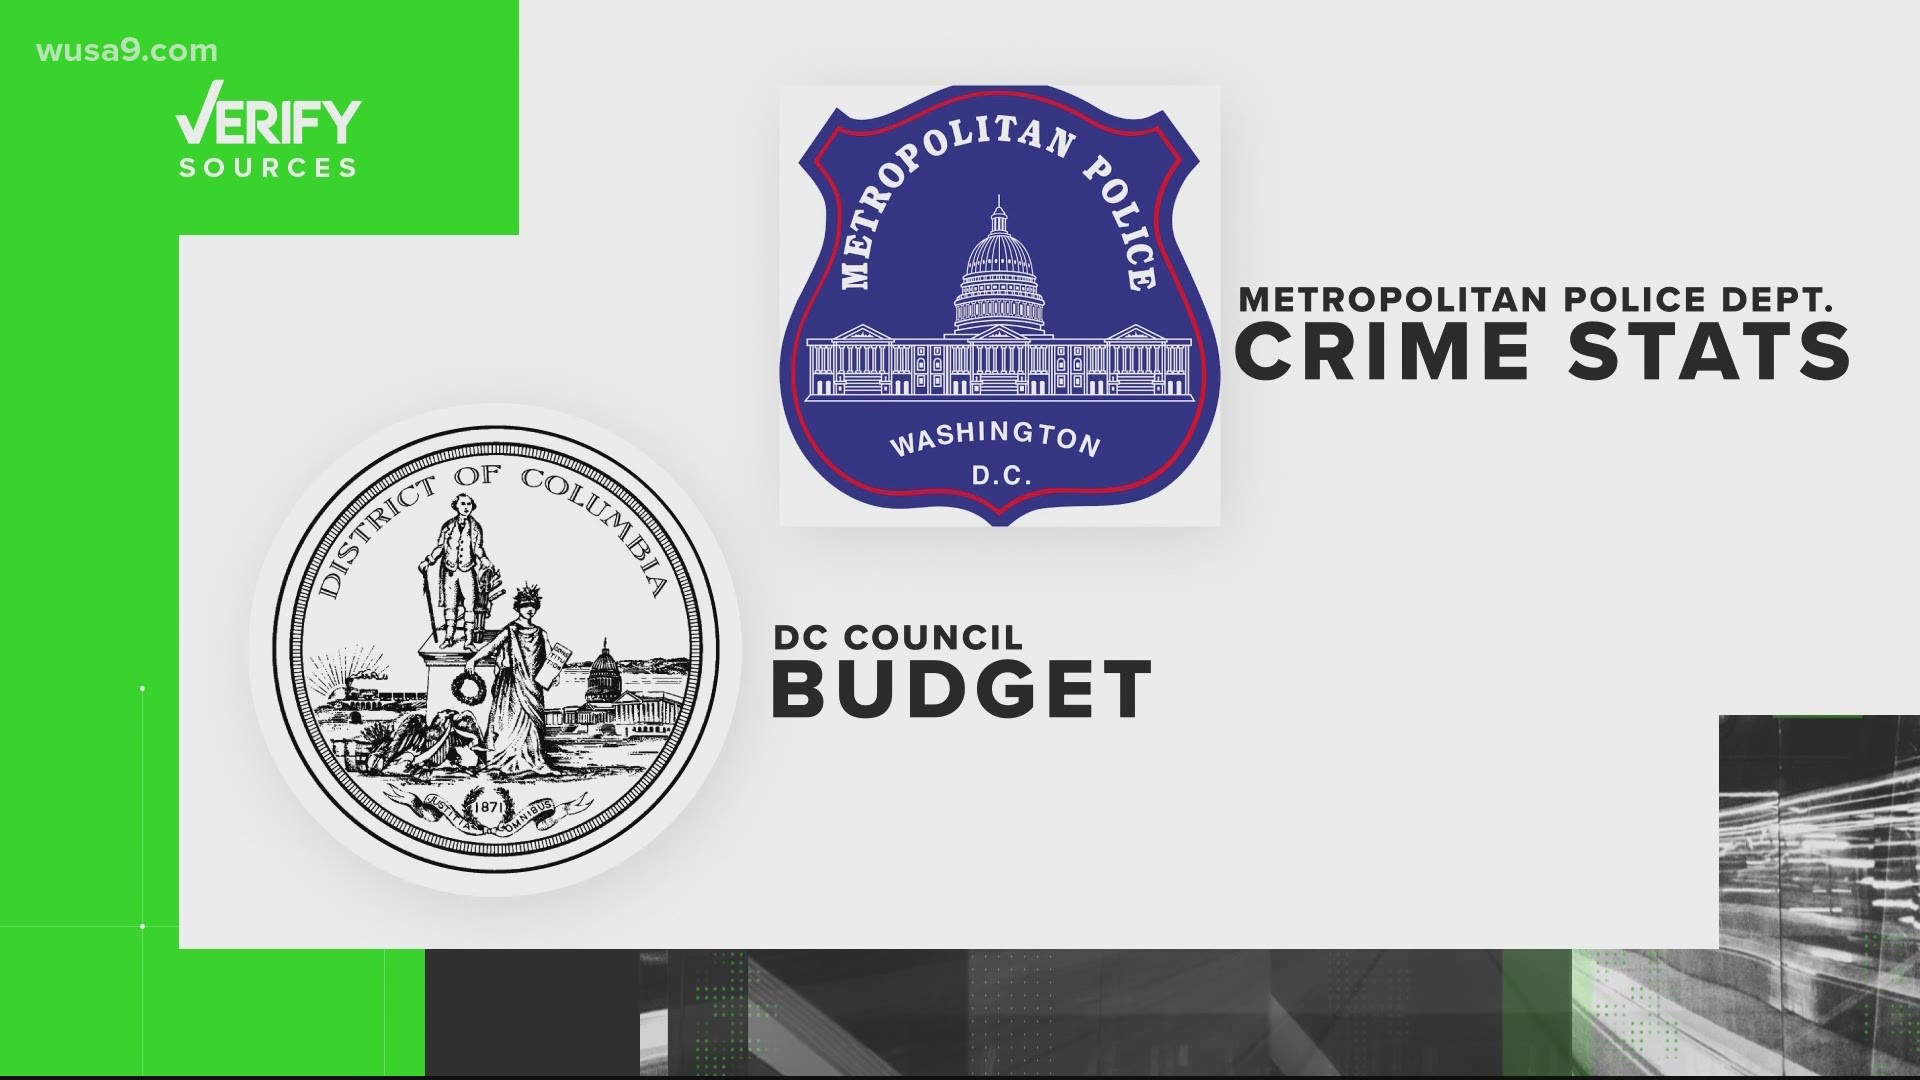 The VERIFY team can confirm that there has not been a significant increase in crime nor an MPD budget cut.